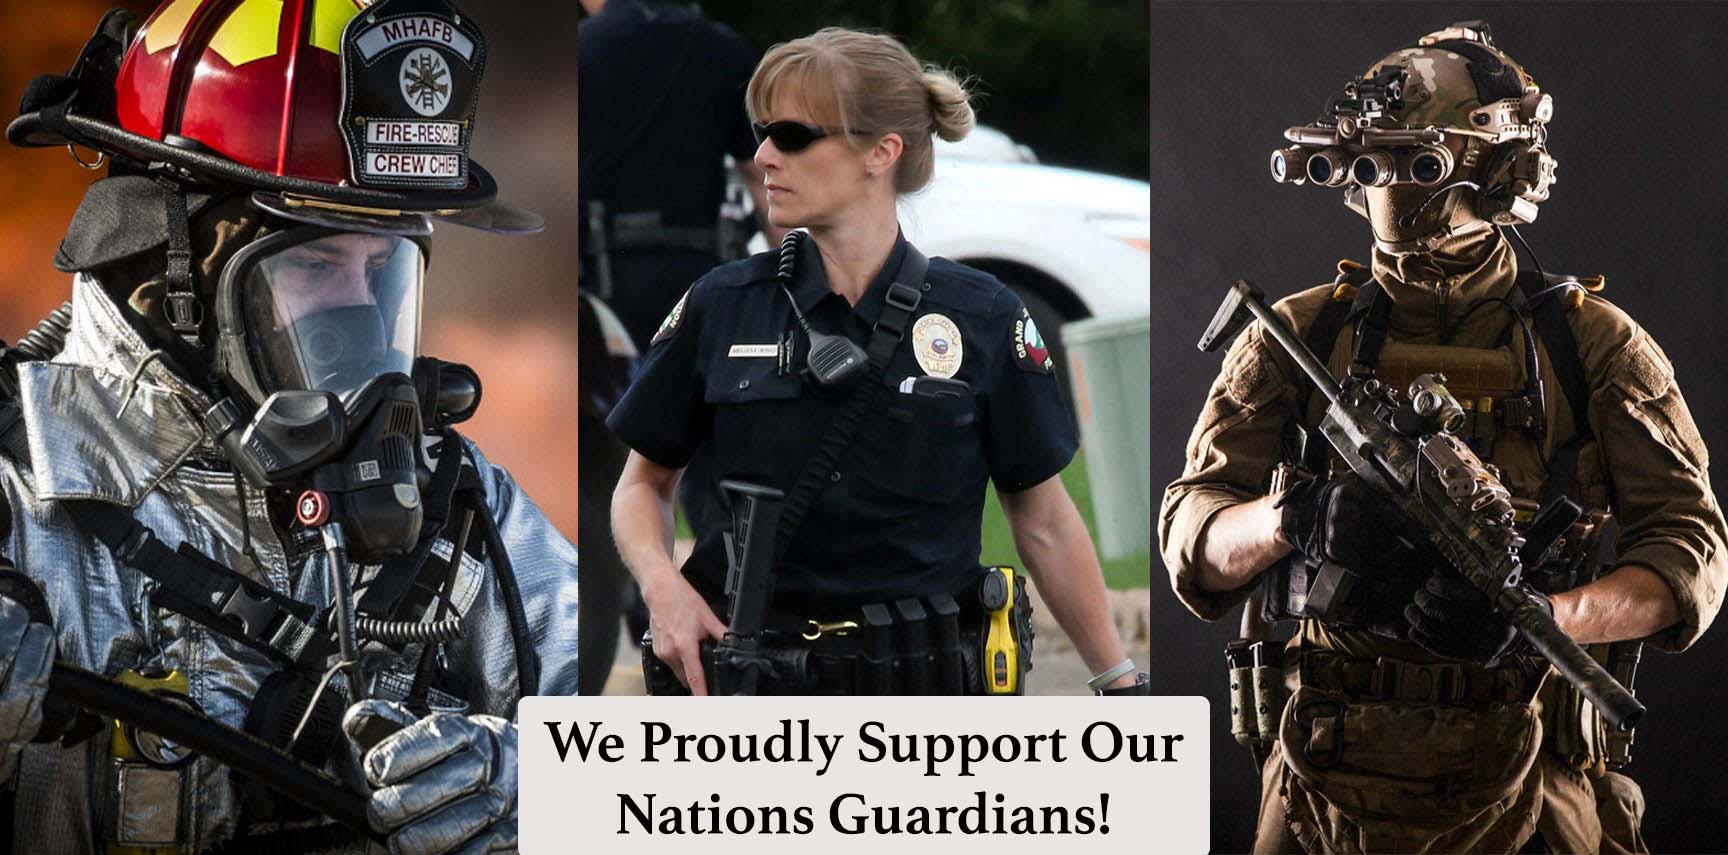 We Proudly Support Our Nations Guardians!